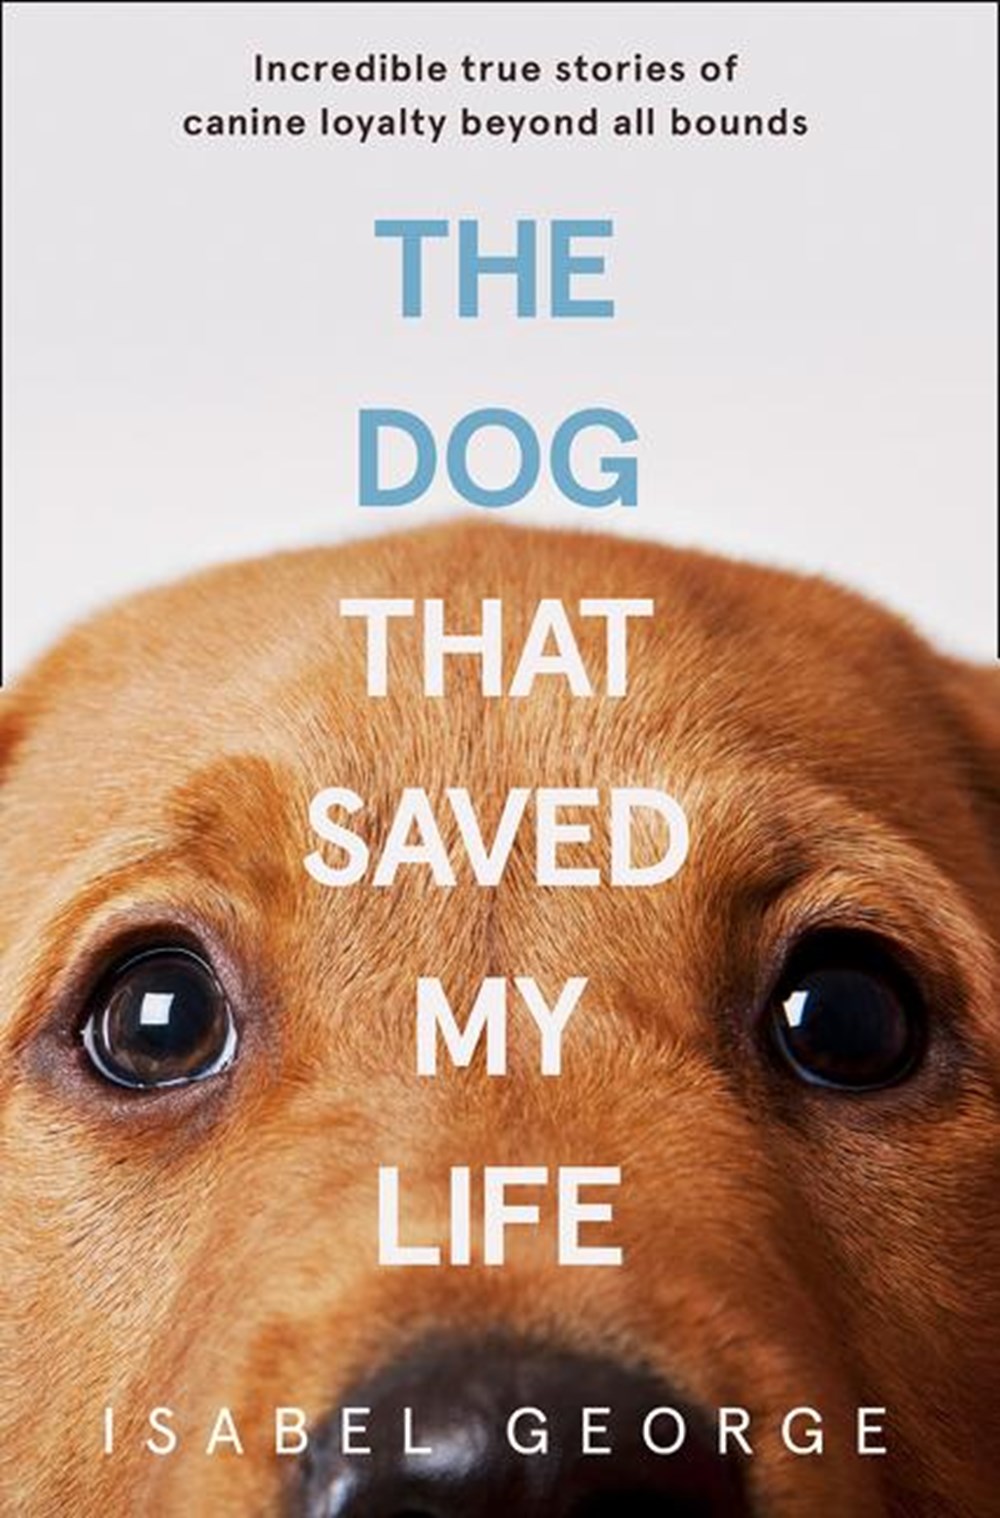 Dog That Saved My Life: Incredible True Stories of Canine Loyalty Beyond All Bounds